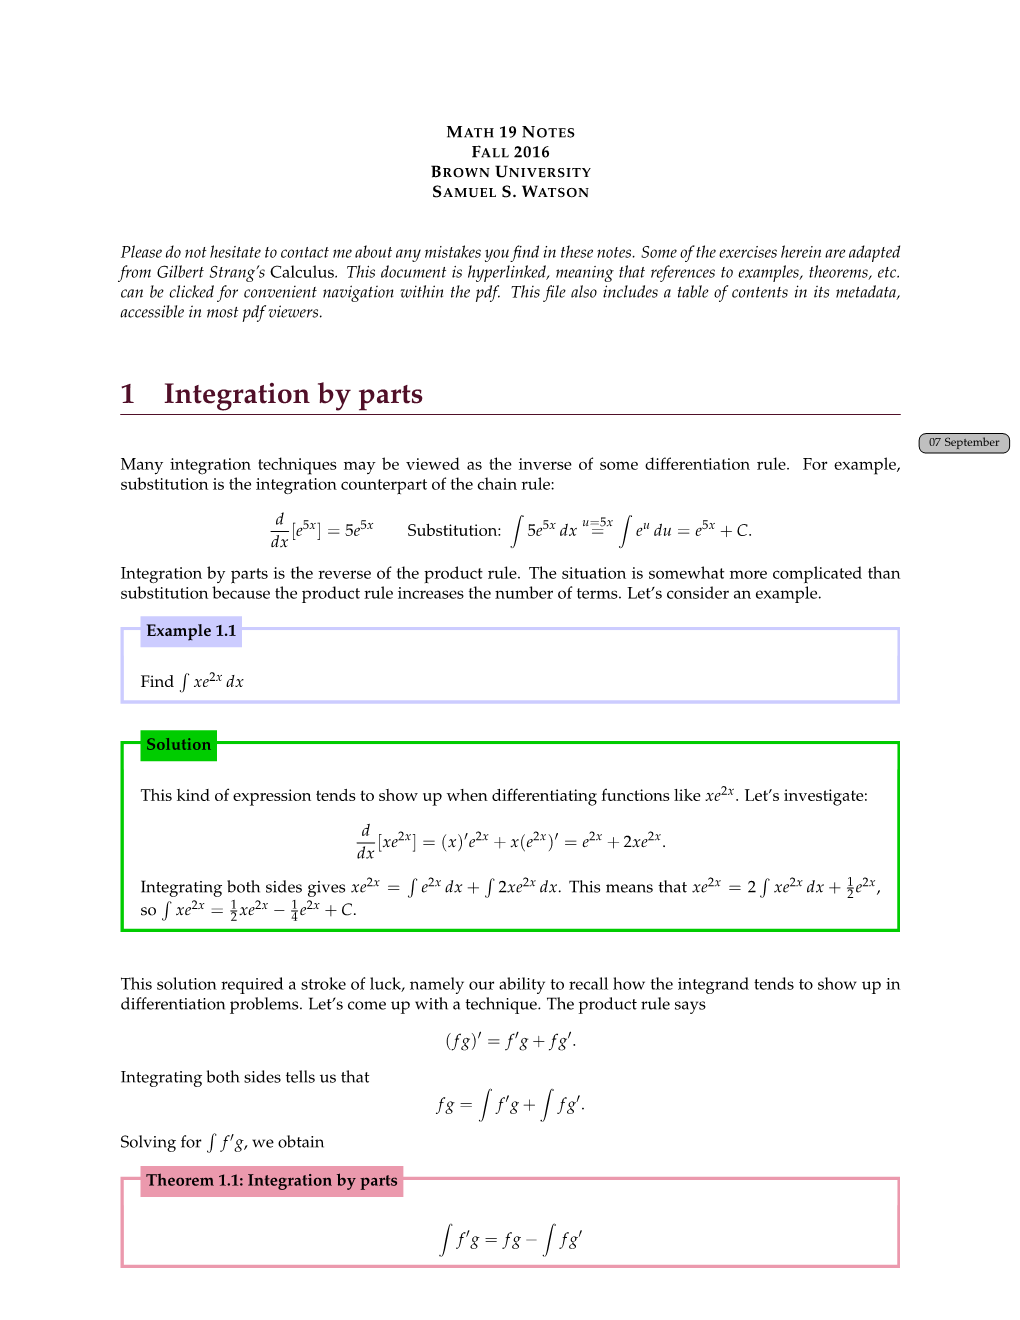 1 Integration by Parts